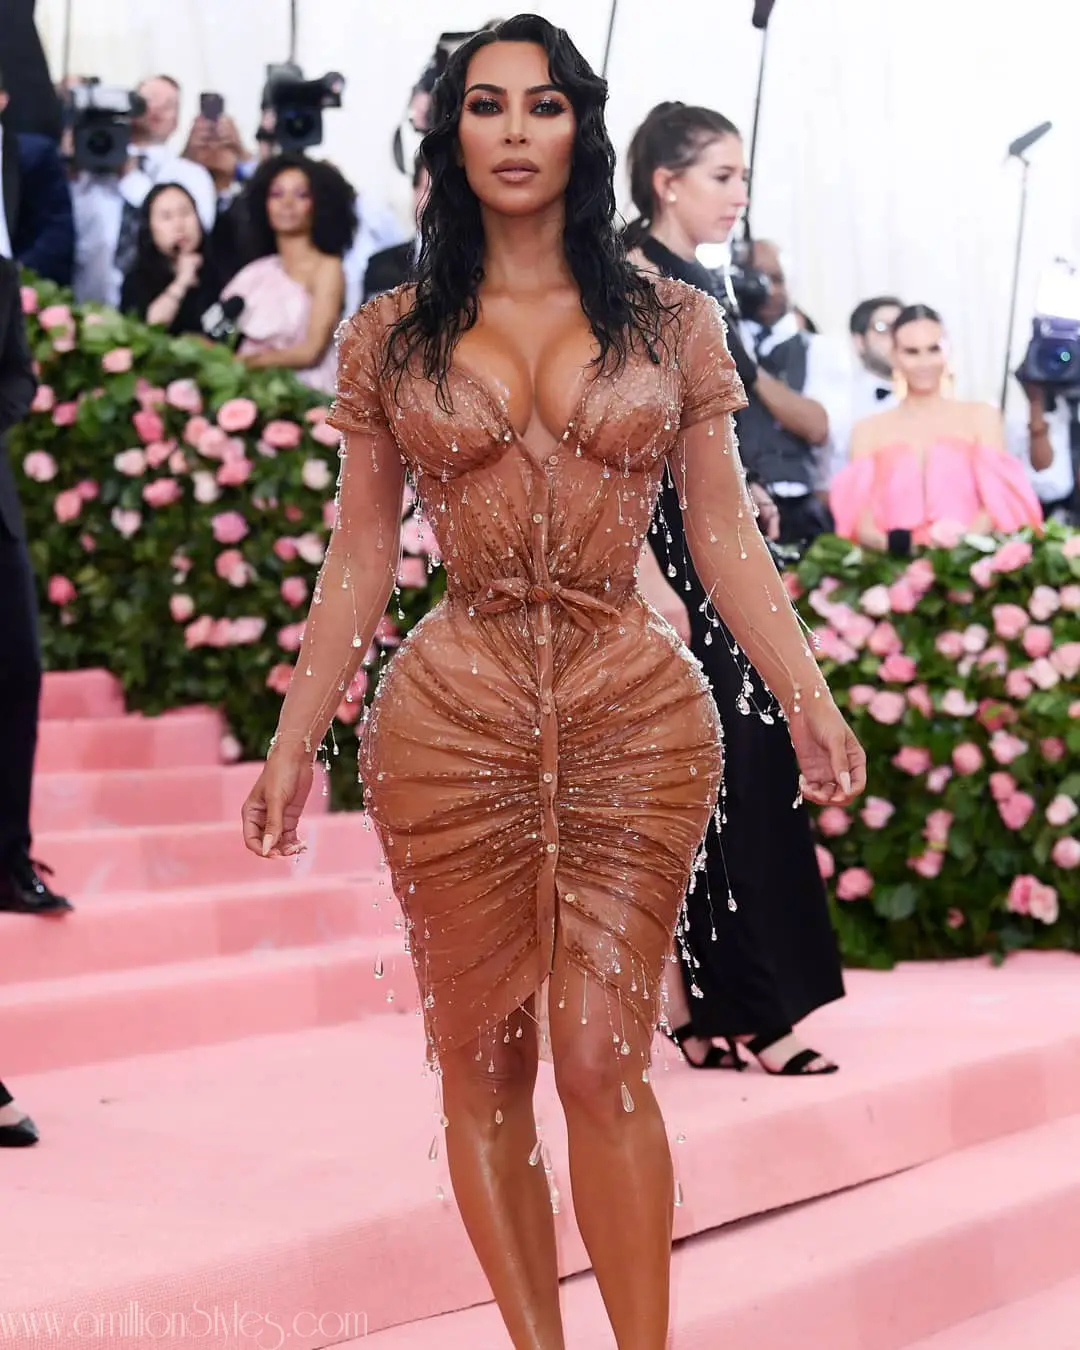 Here Are Some Iconic Looks From 2019 Met Gala